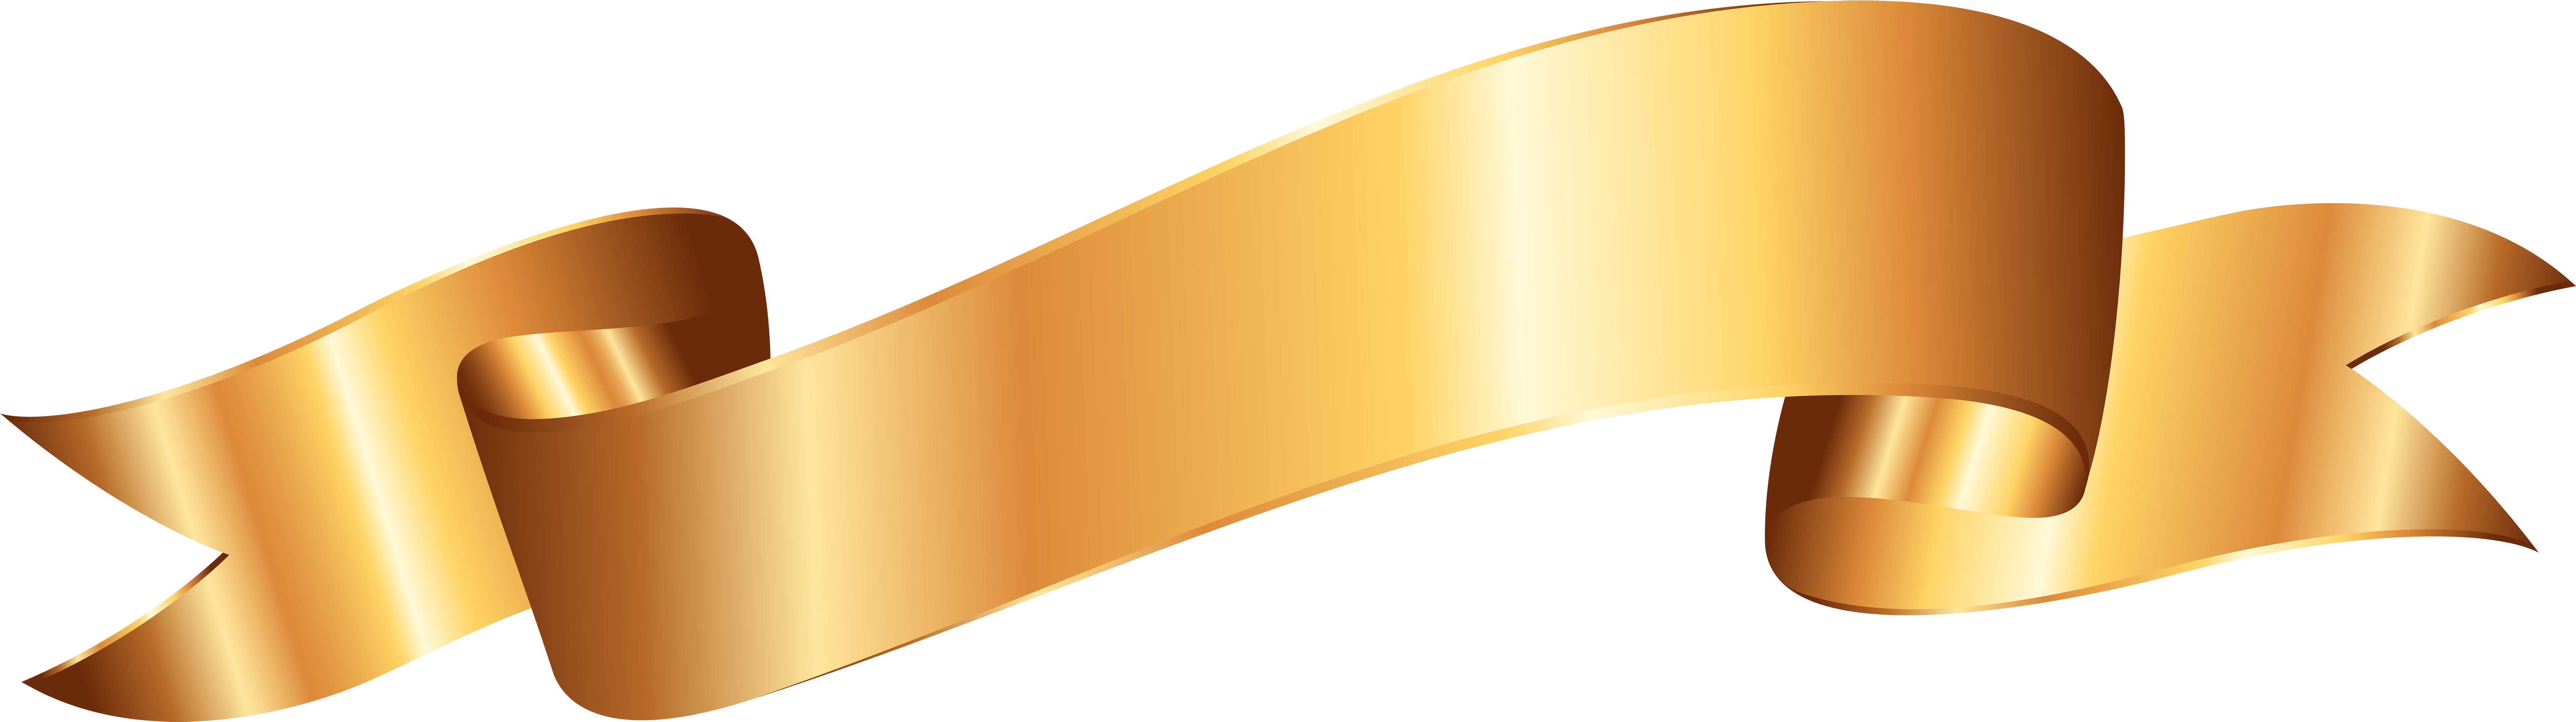 Gold Banner Png 7916 X 2219